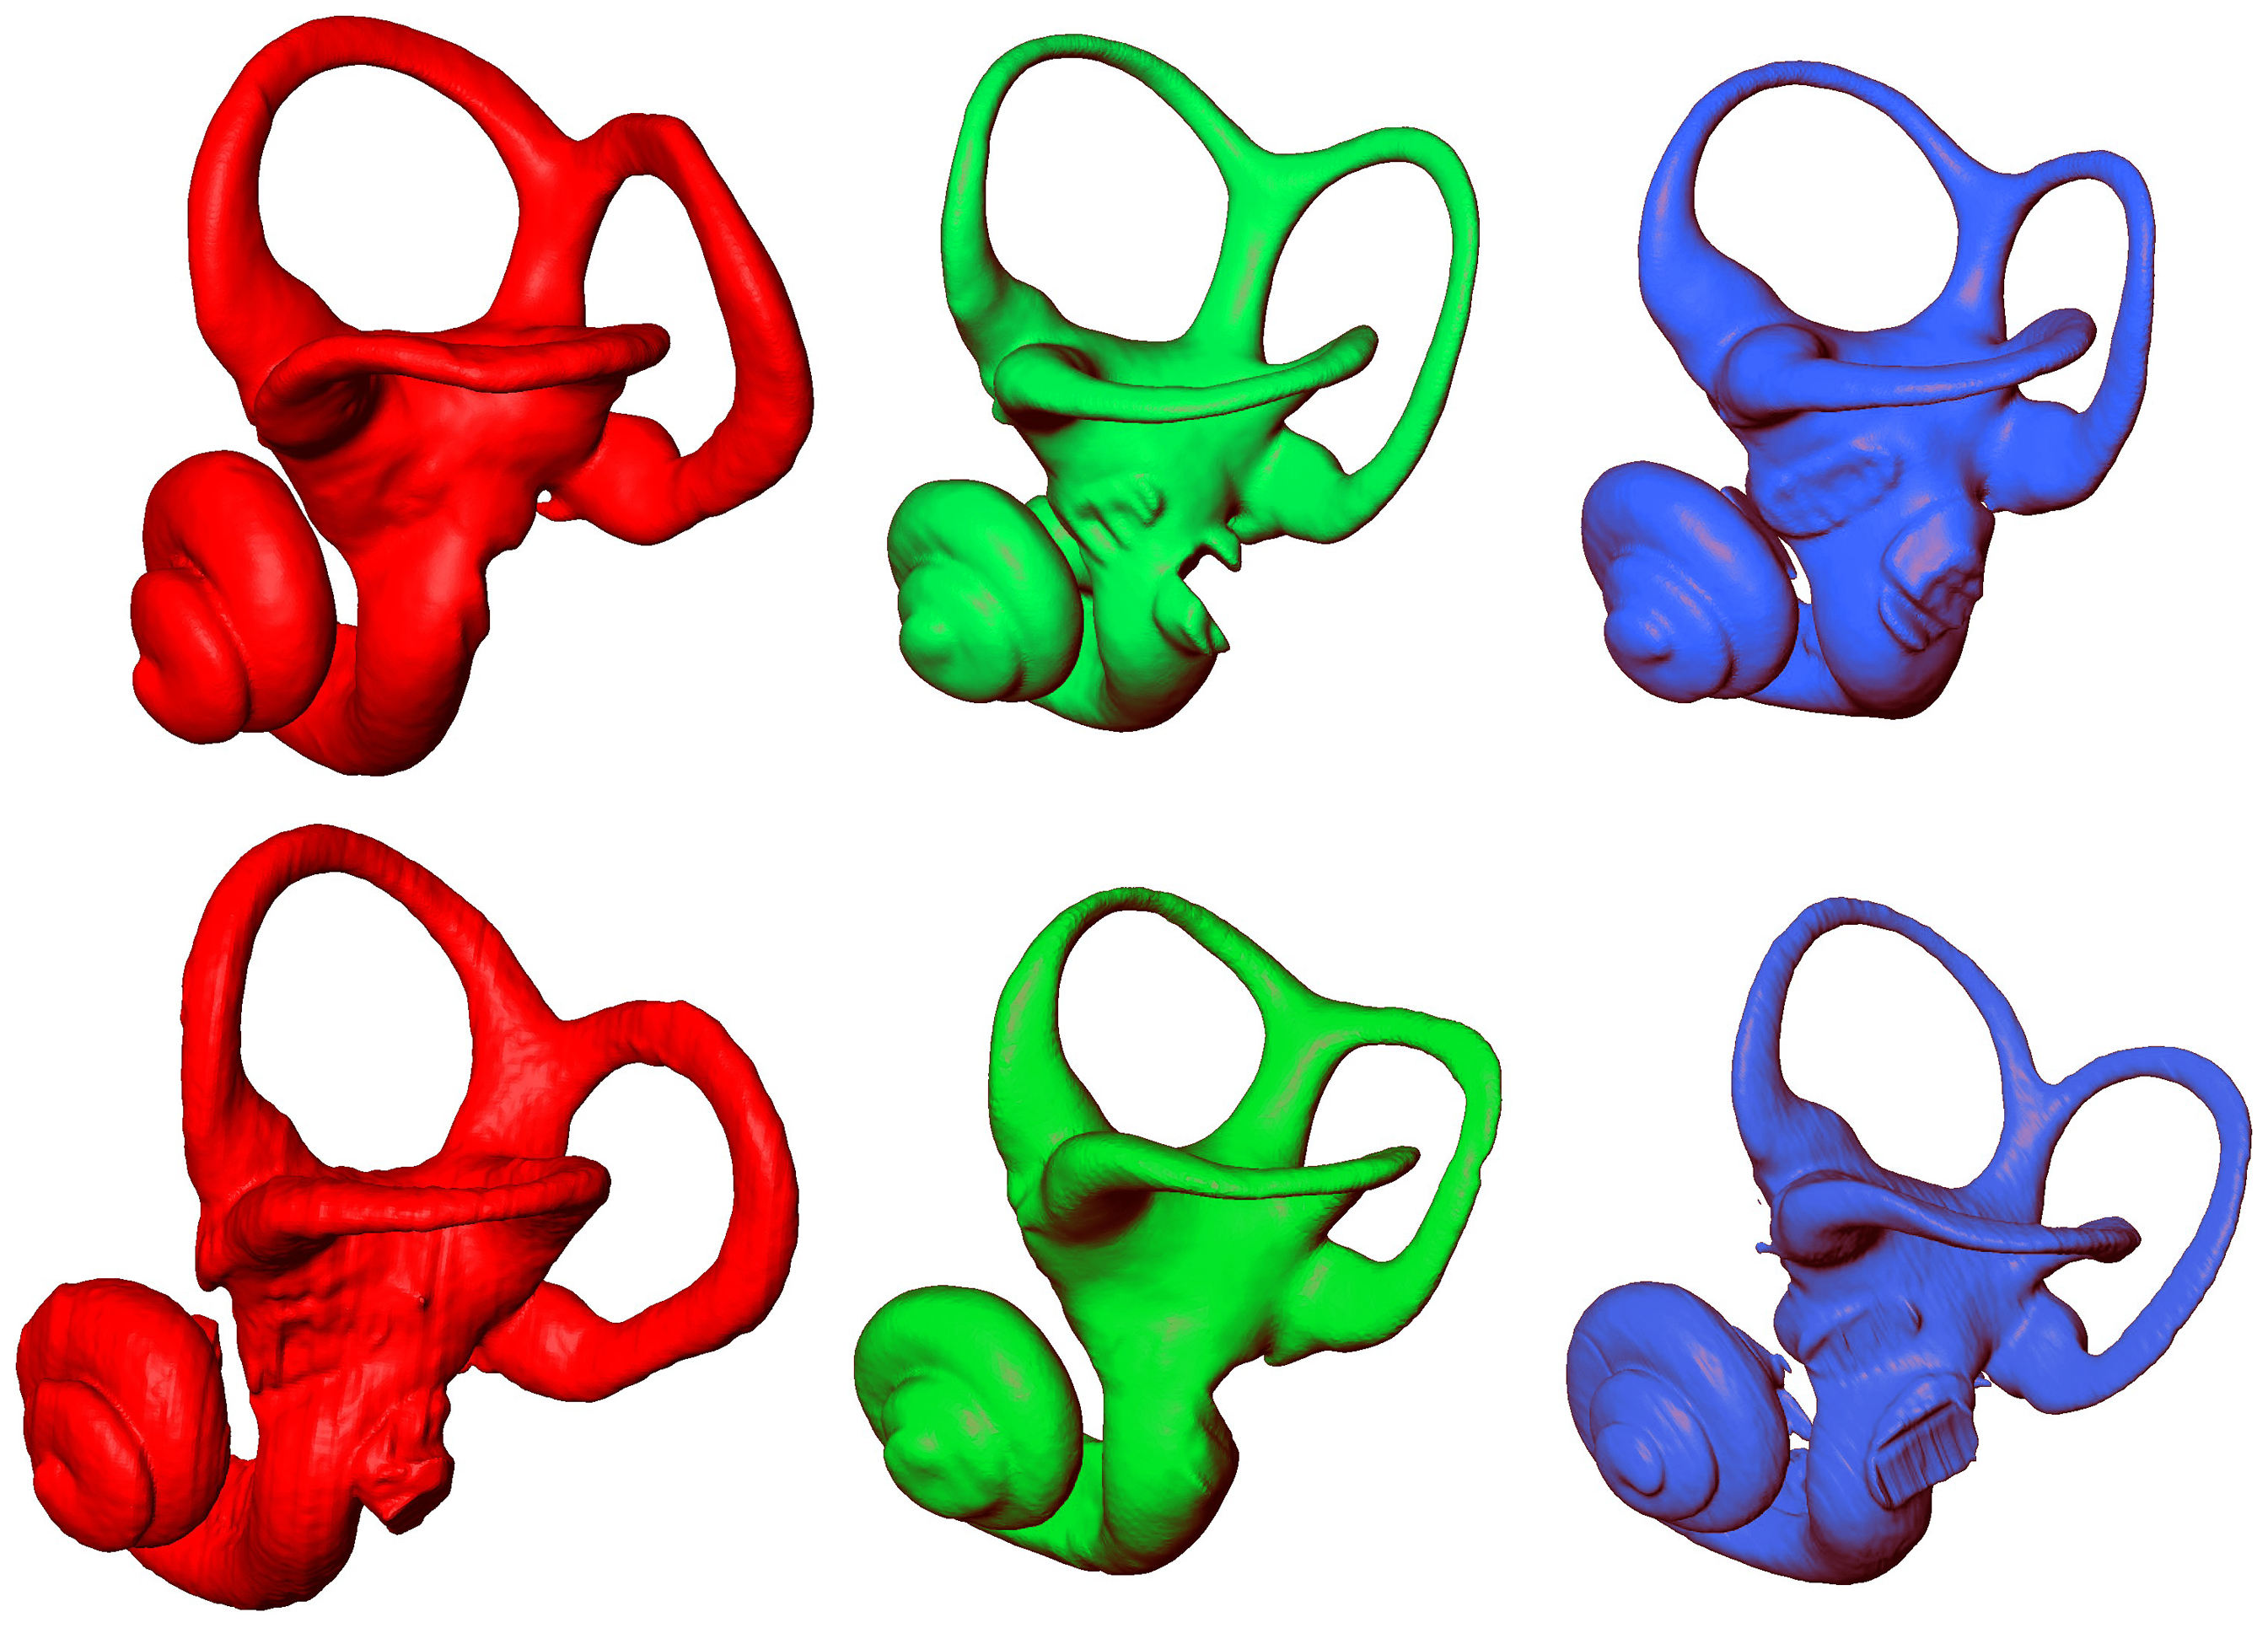 Figure 4 MicroCT-based rendering of the left bony labyrinth lateral aspect in: Homo sapiens (red, on the left), Pan paniscus (green, in the middle) and Pan troglodytes (blue, on the right).